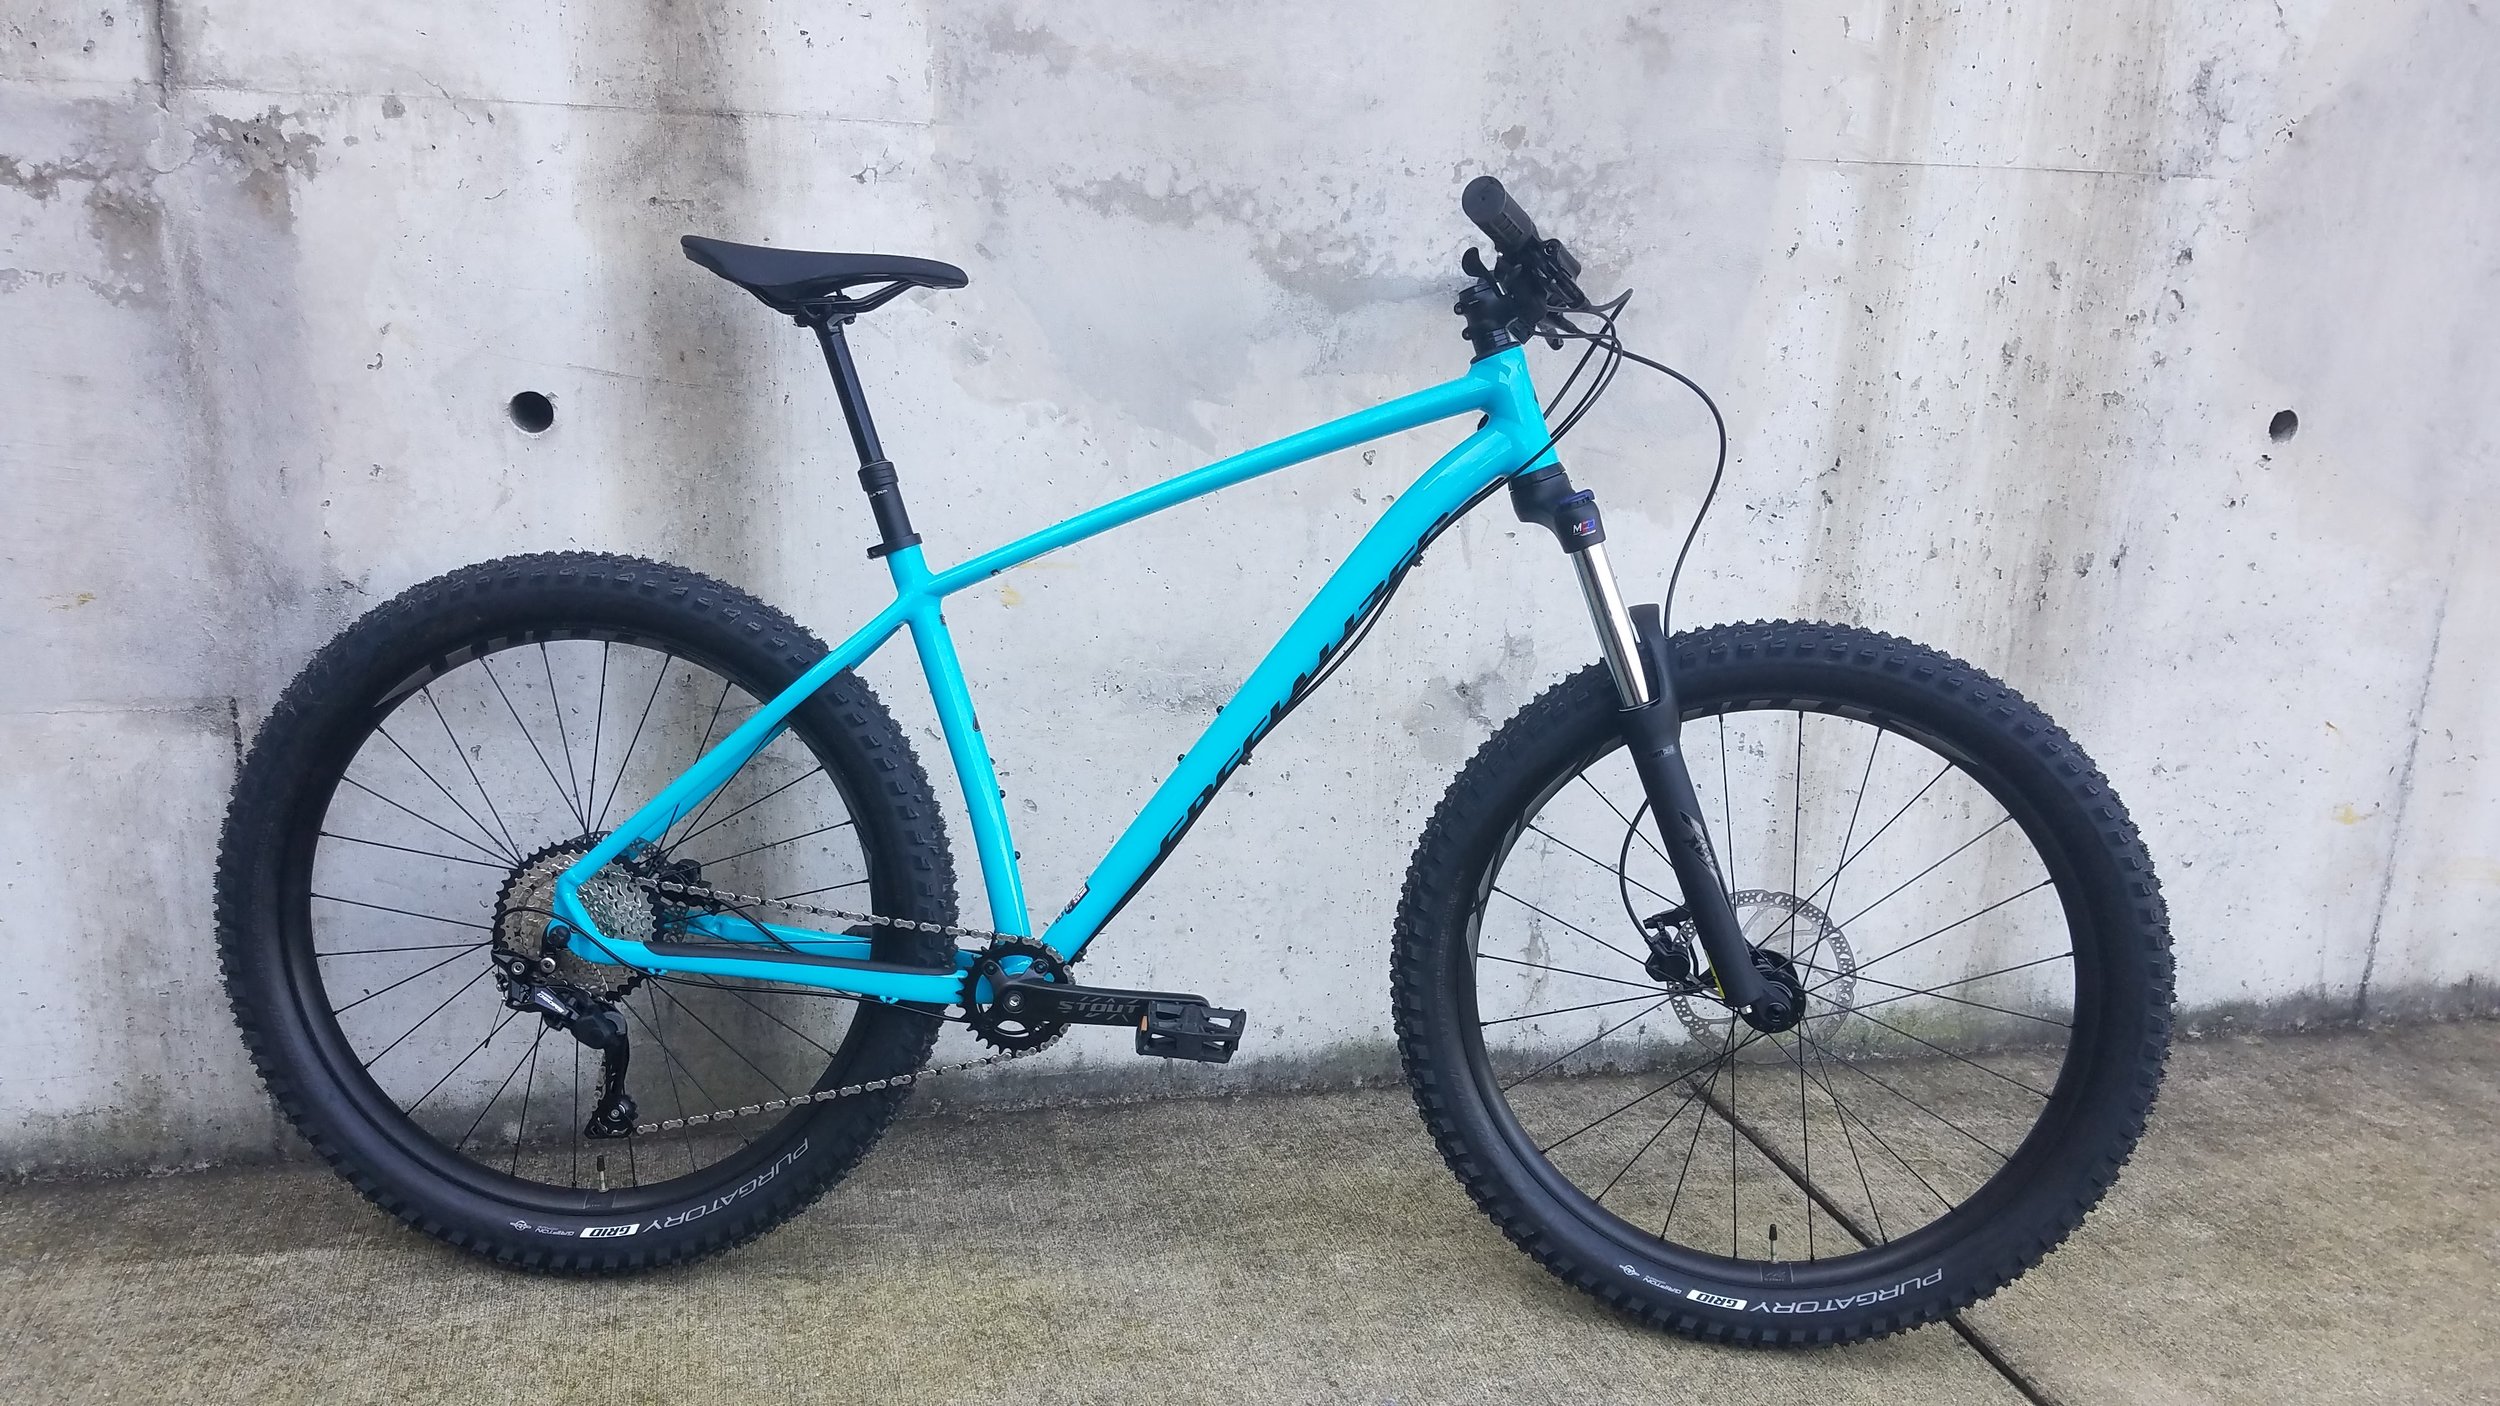 2018 specialized fuse